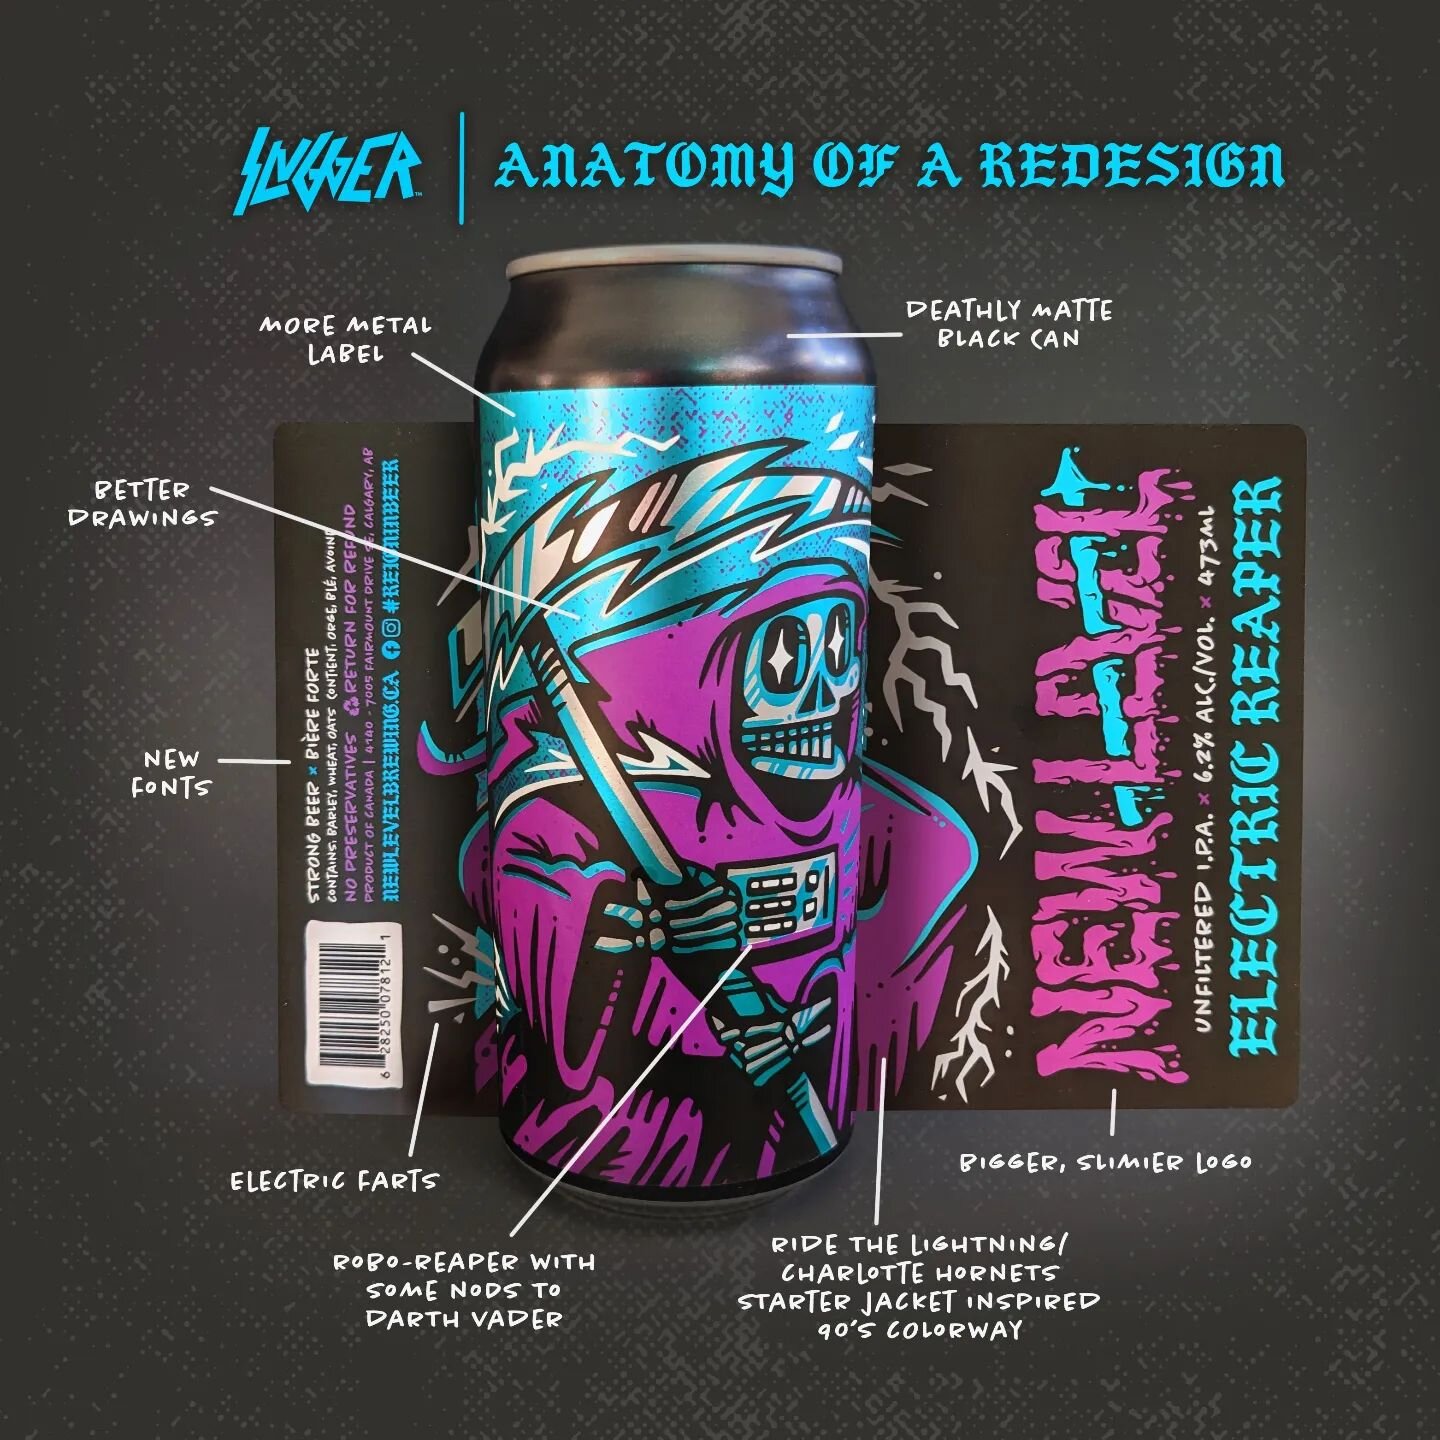 Post-game breakdown of our redesign of the beer labels for @newlevelbrewing. 

#craftbeer #abcraftbeer #beerdesign #packagingdesign #packaging #sluglife #reigninbeer